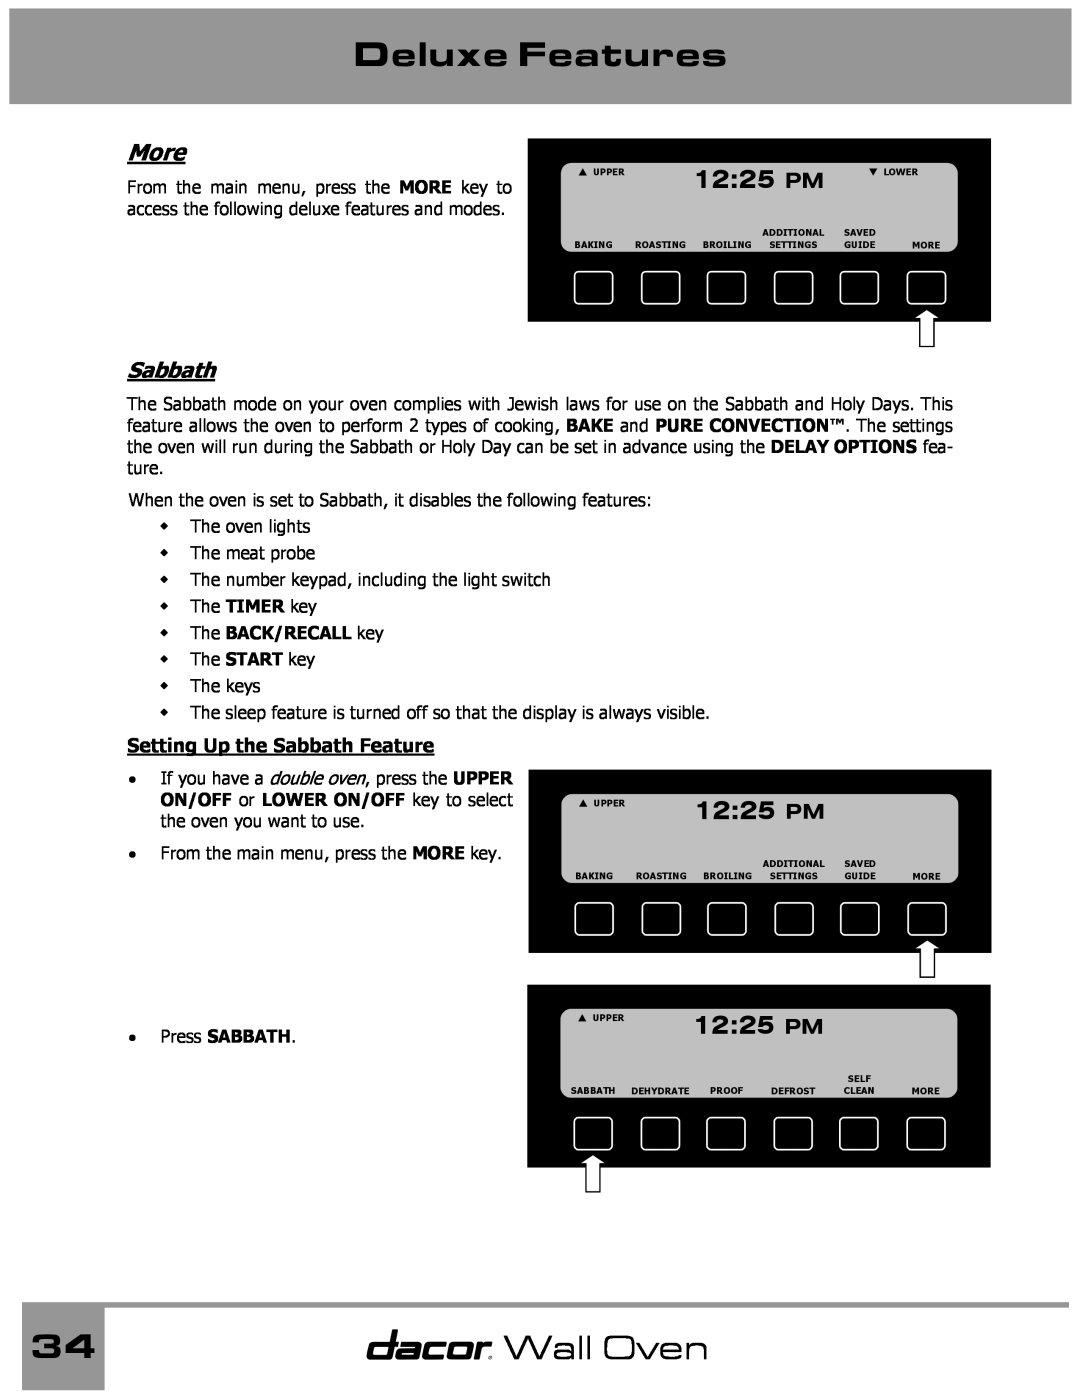 Dacor Wall Oven manual More, Setting Up the Sabbath Feature, Deluxe Features, 1225 PM, The BACK/RECALL key 